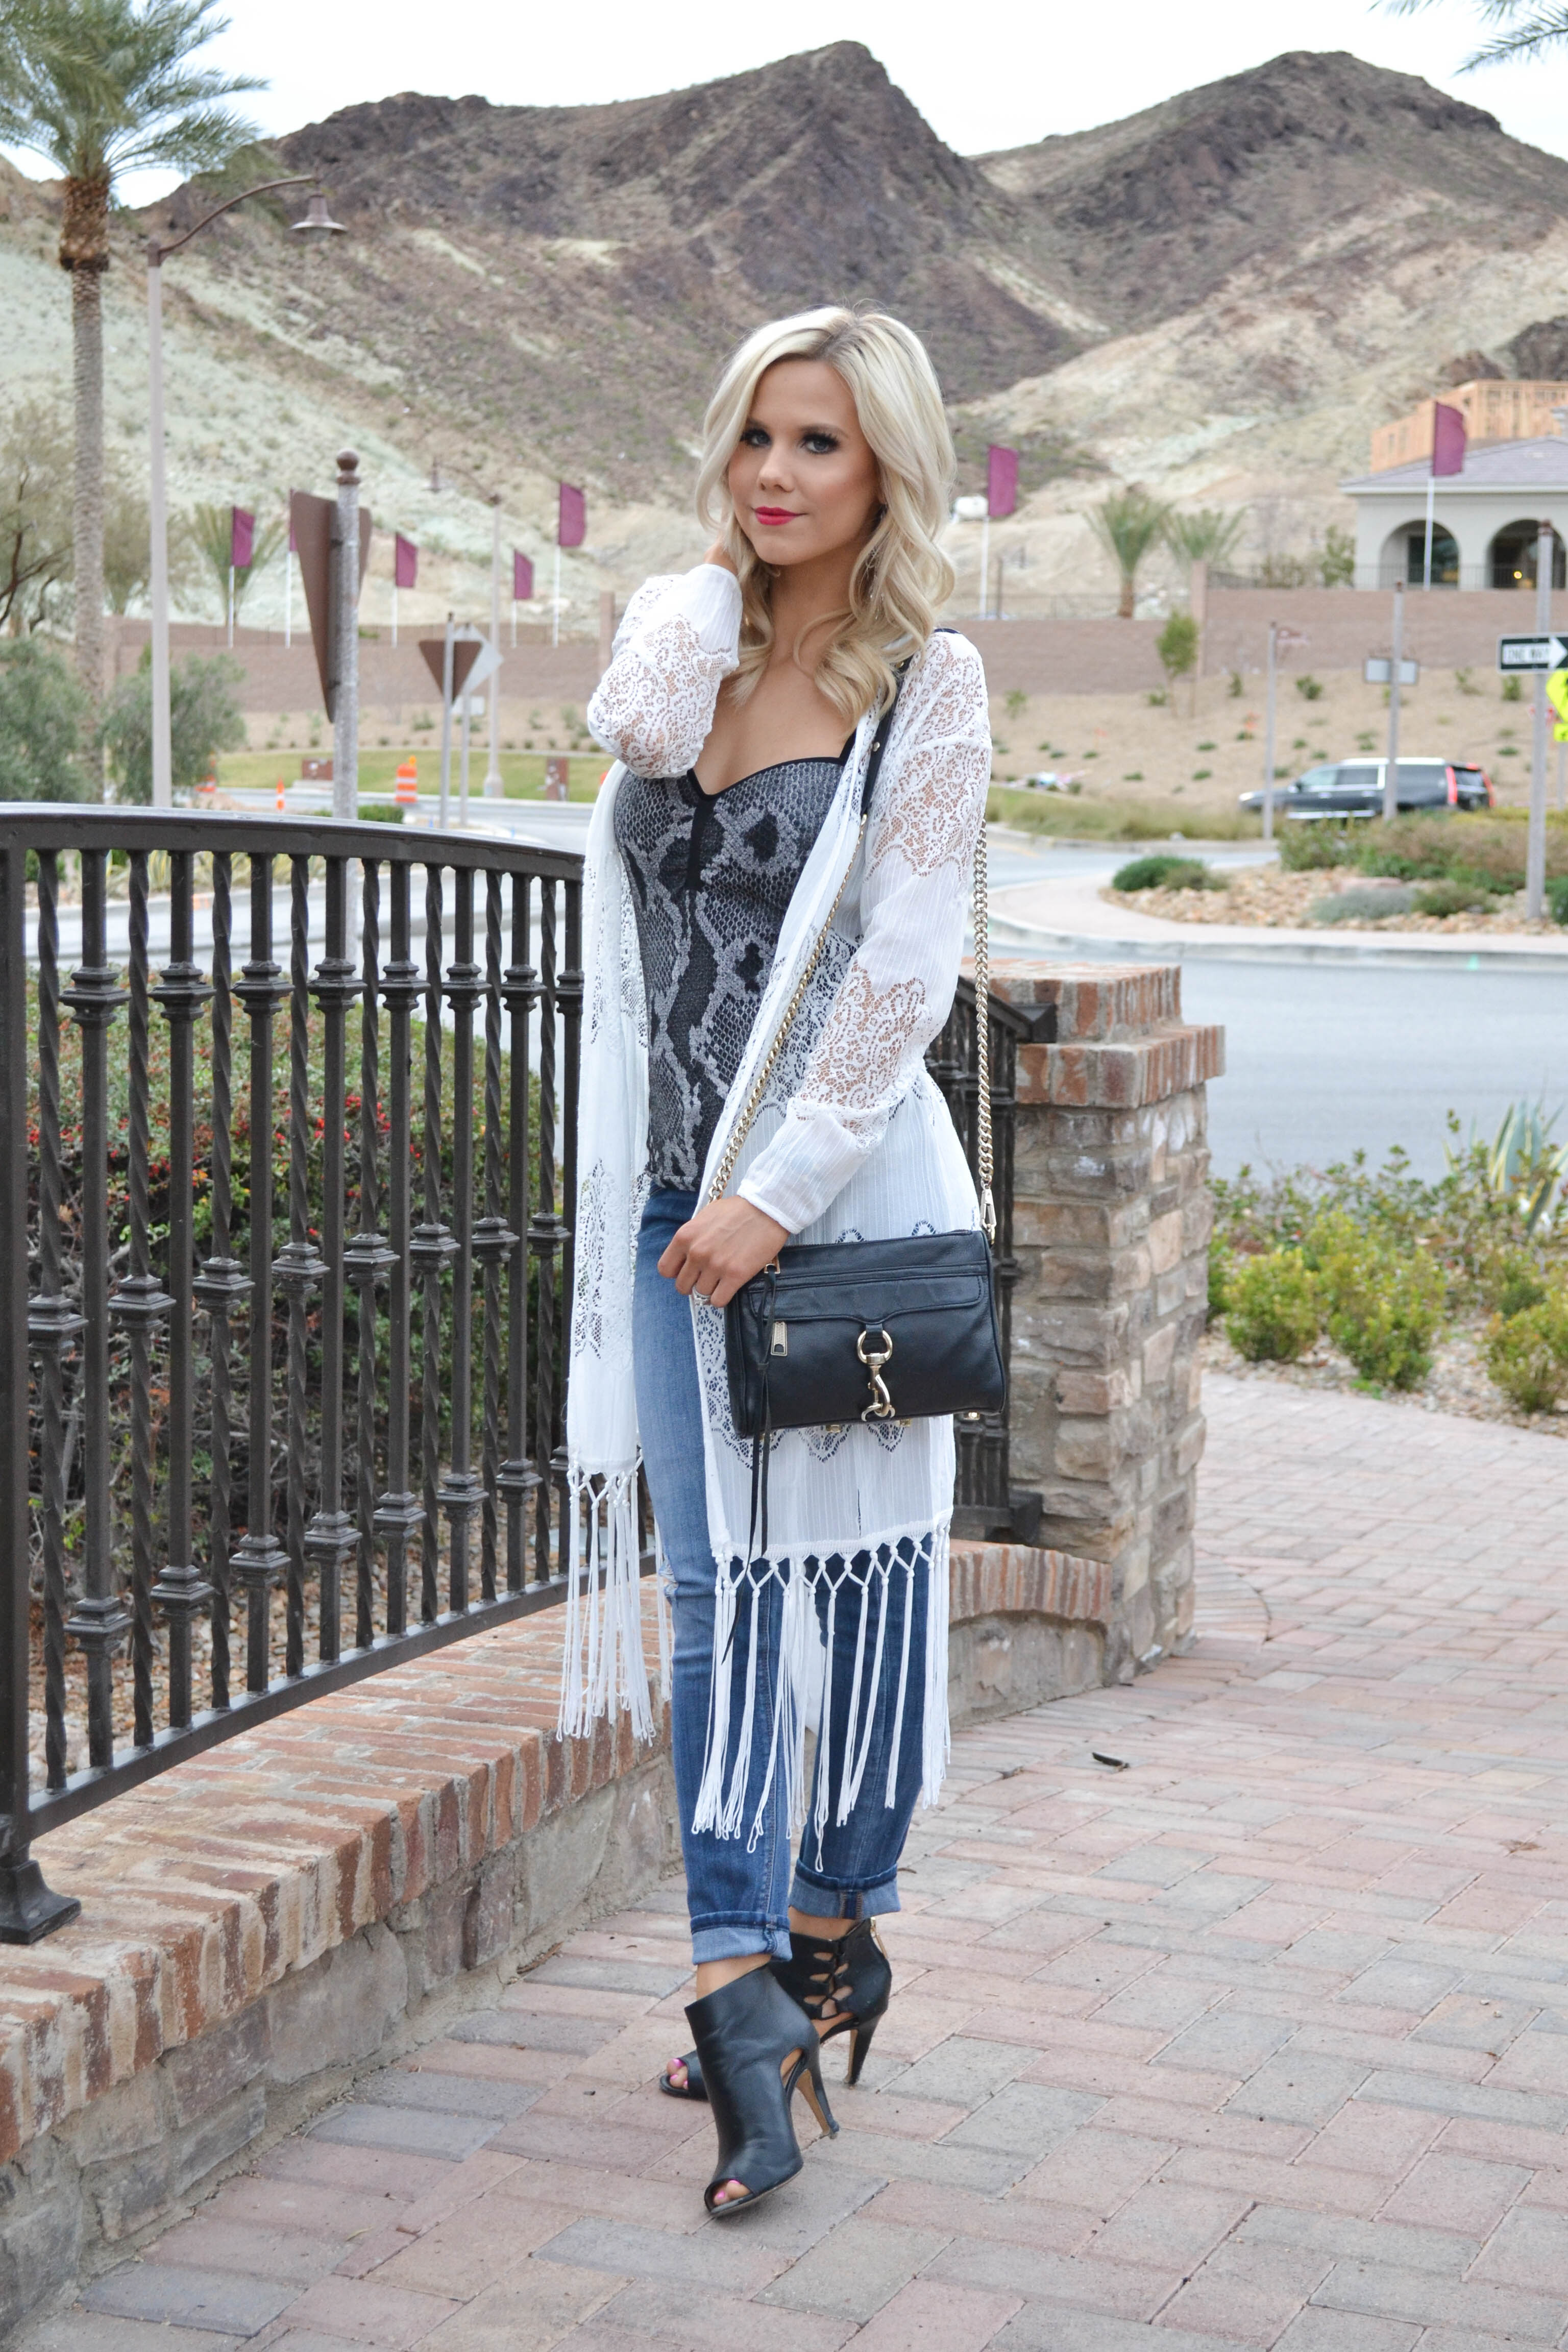 Lace Fringe Kimono |Get Spring and Summer Ready|